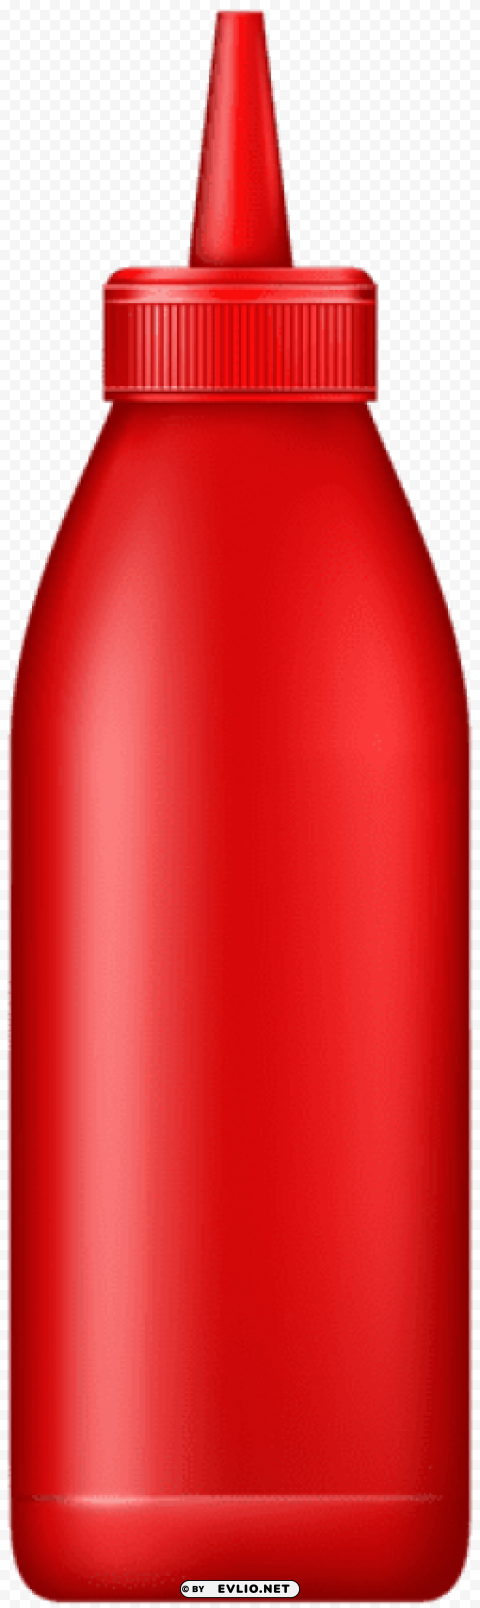 ketchup bottle Isolated Element on HighQuality Transparent PNG